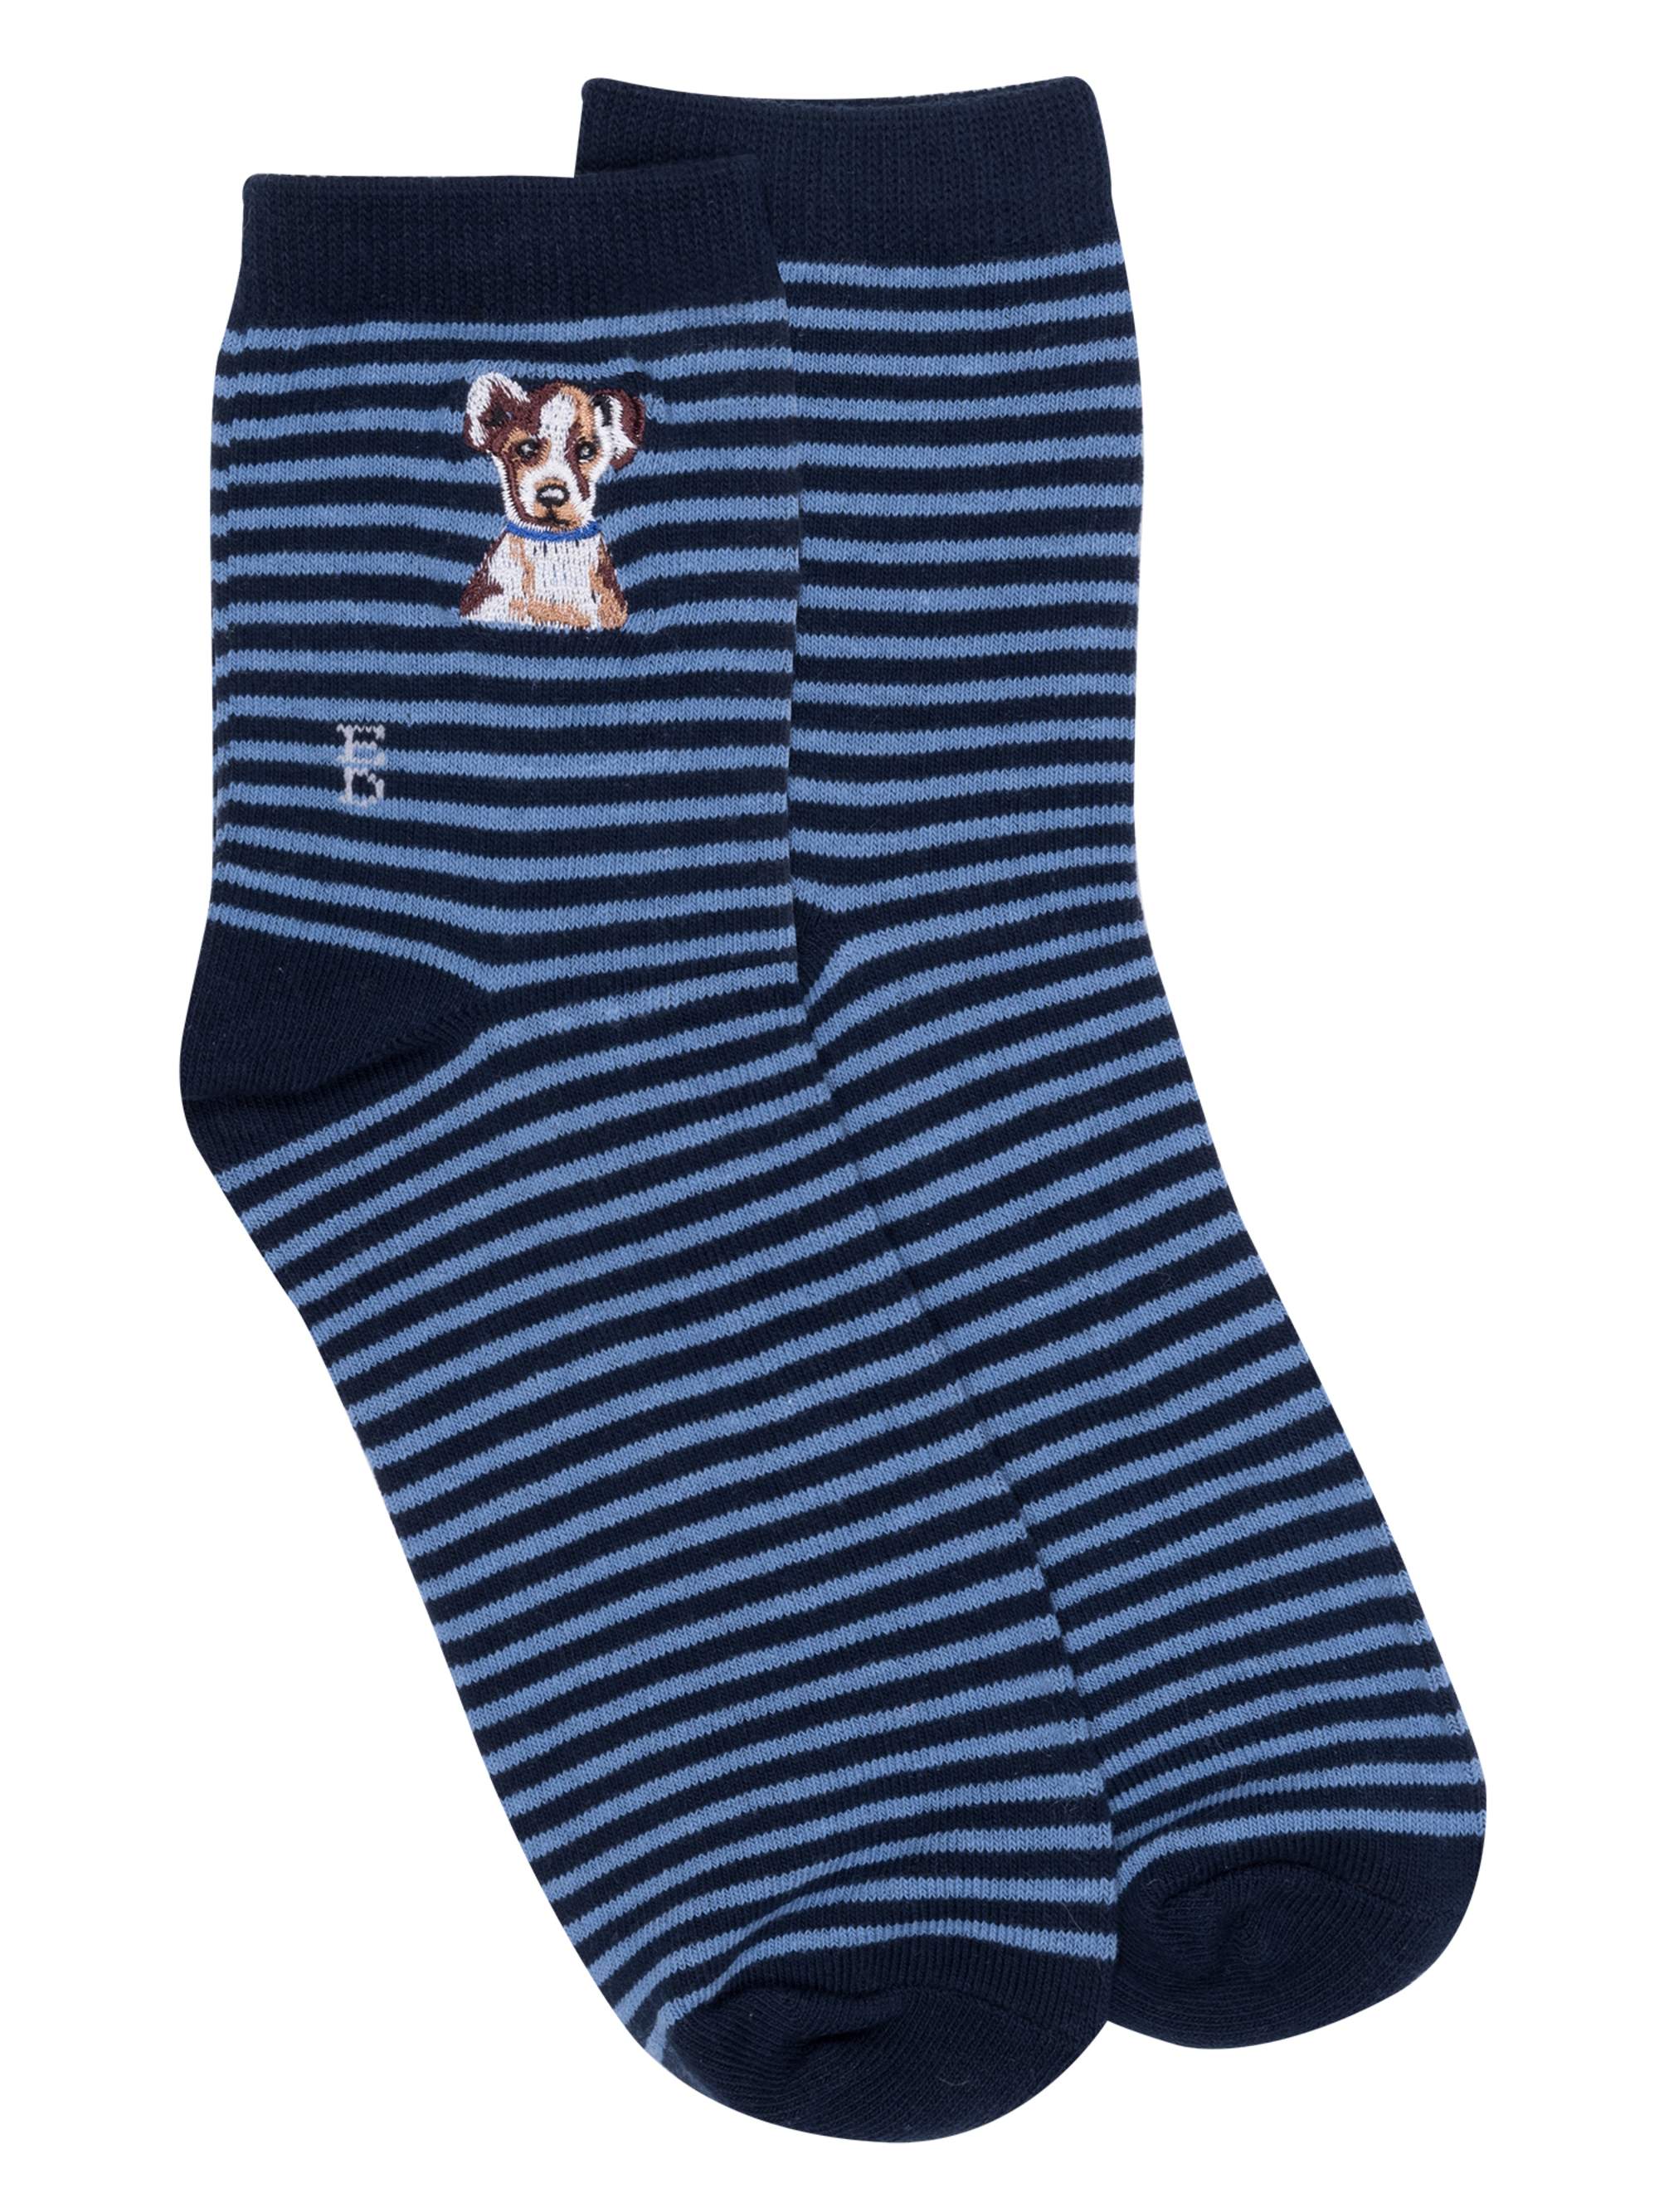 Women's Striped Embroidered Dog Low Crew Socks - image 1 of 1